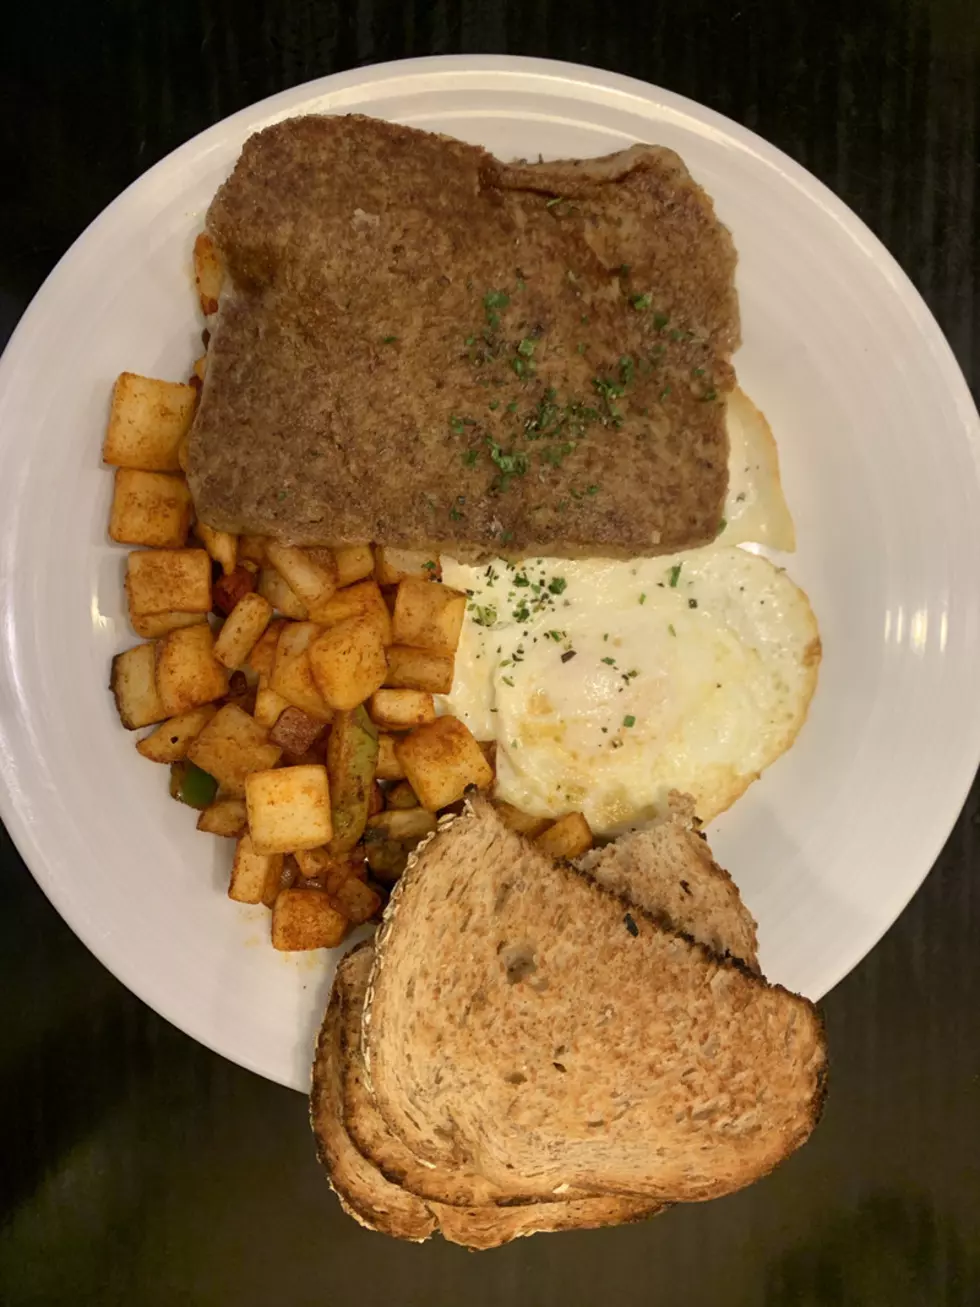 New Yorkers Ask - What Exactly Is Scrapple?